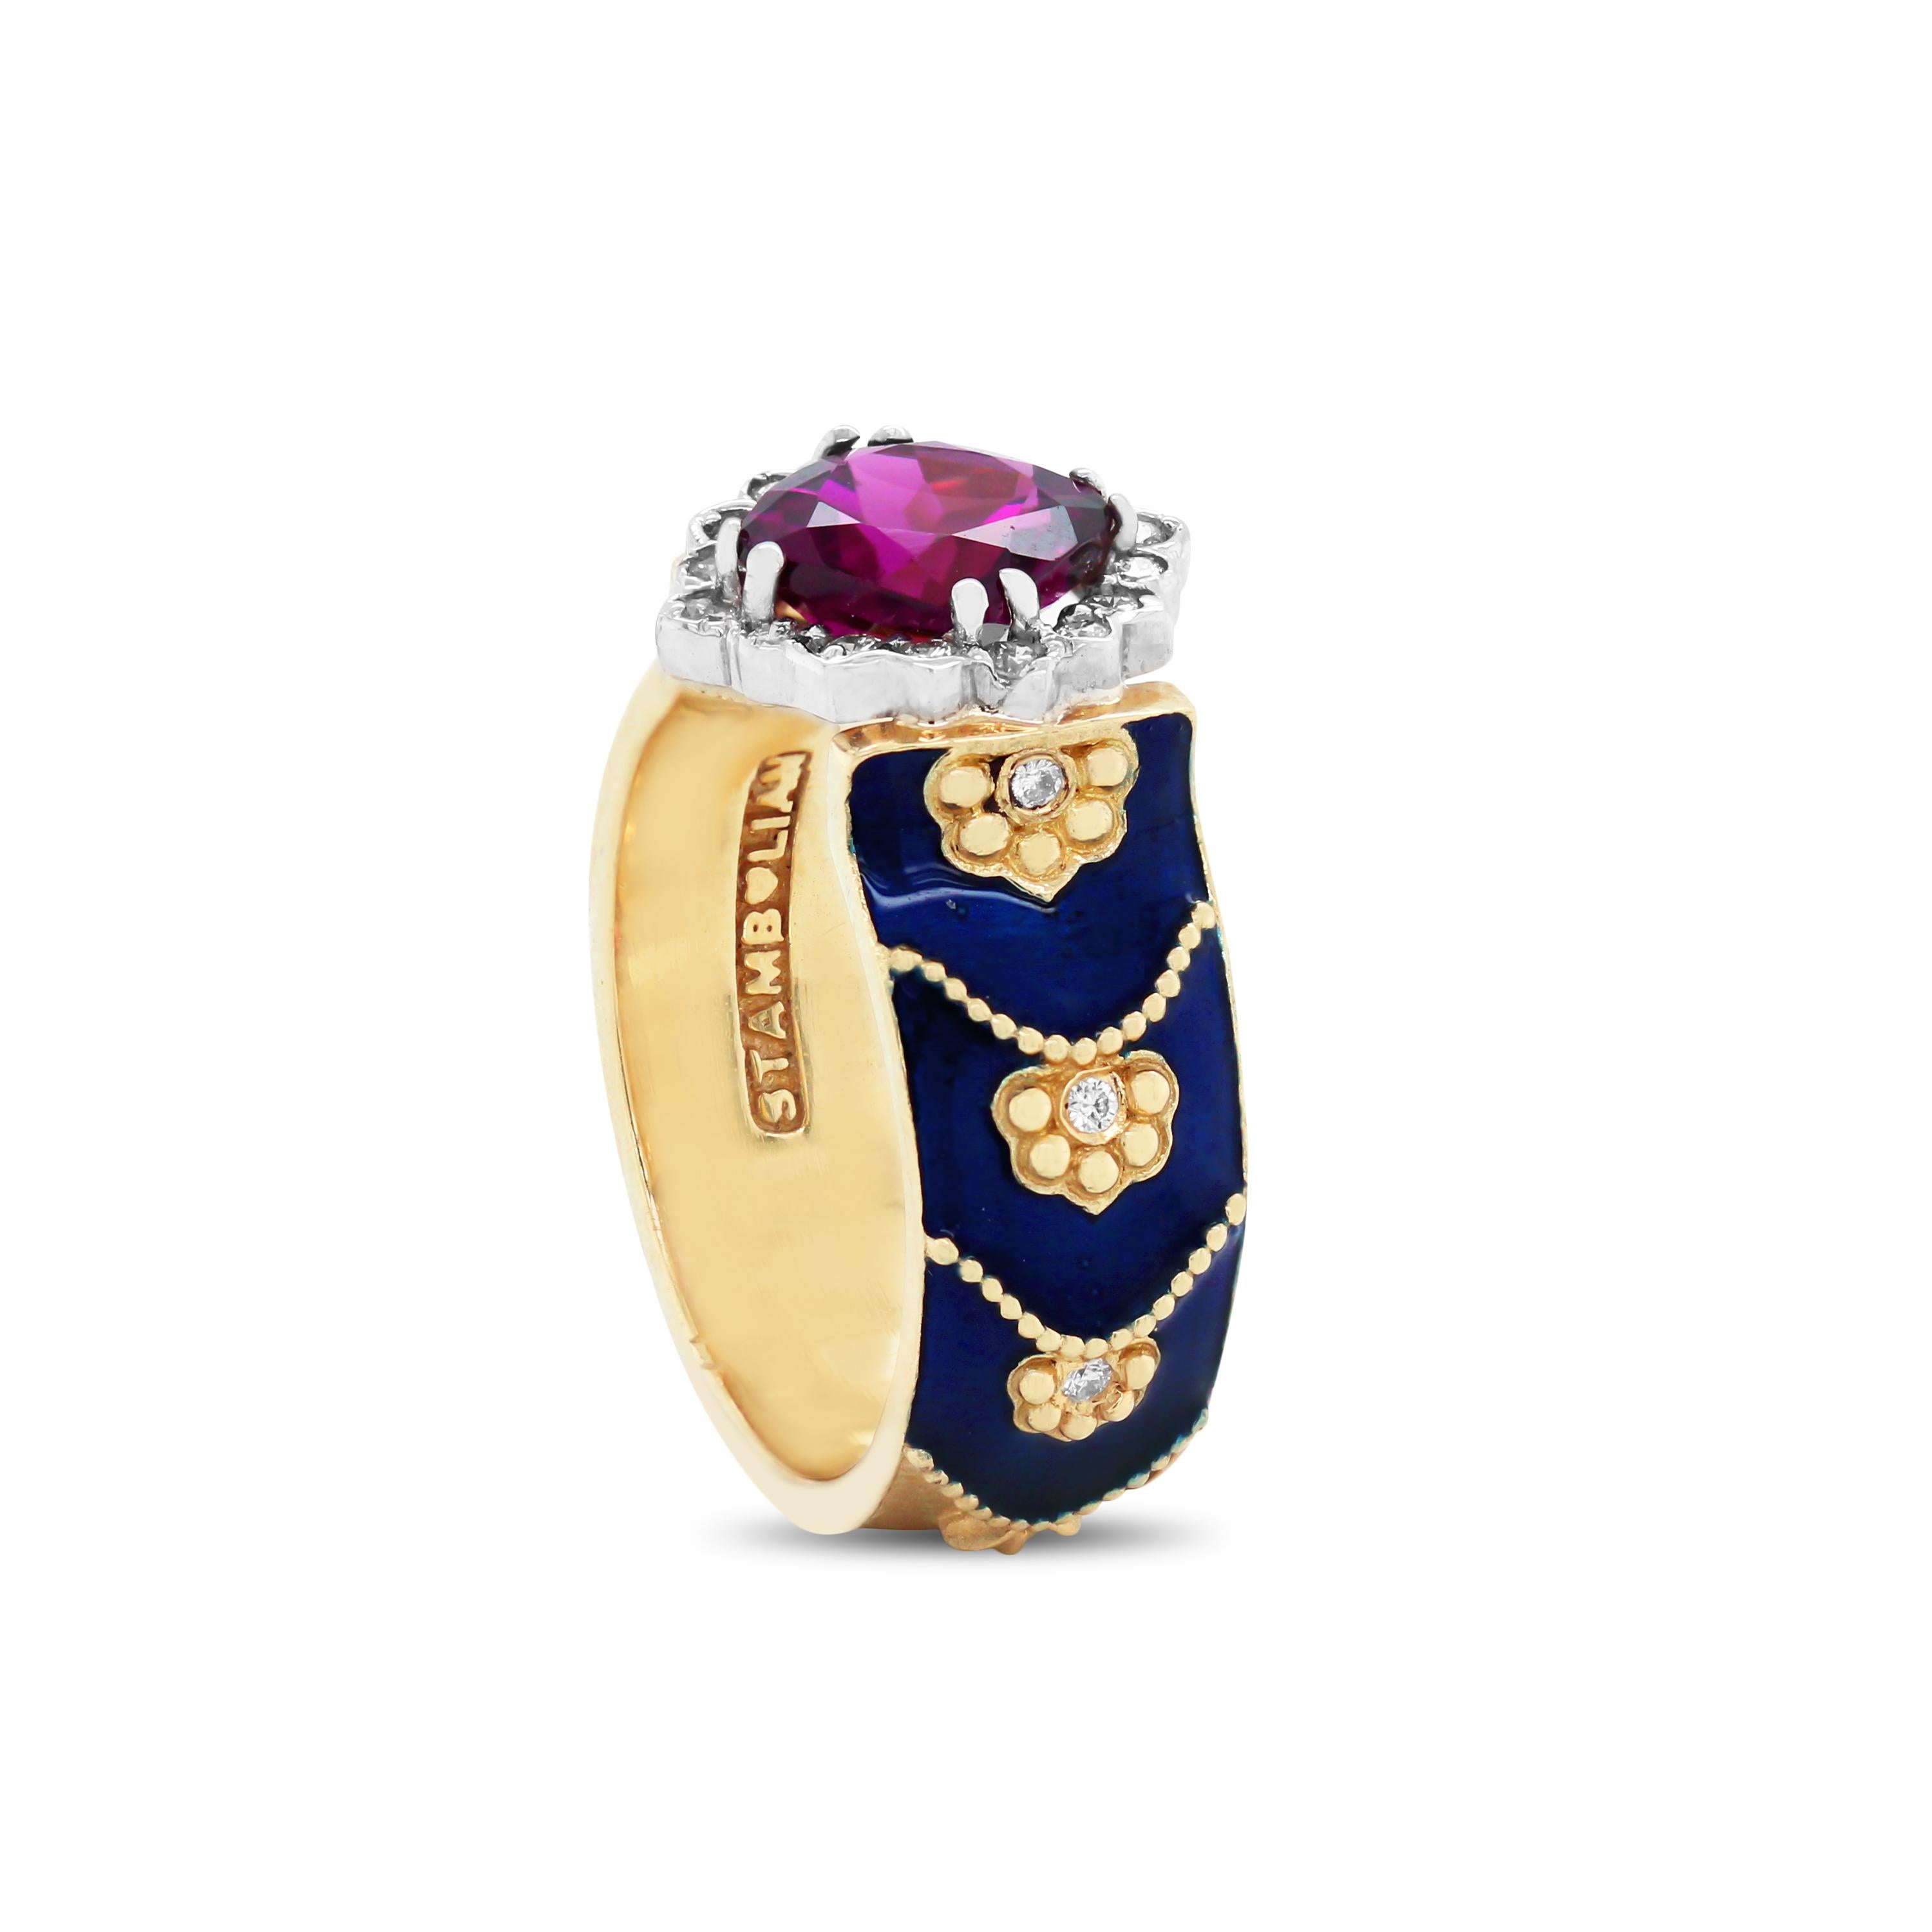 18K Gold Ring with Cobalt Blue Enamel and Magenta Garnet Center with Diamonds by Stambolian

This unique ring from the Stambolian 